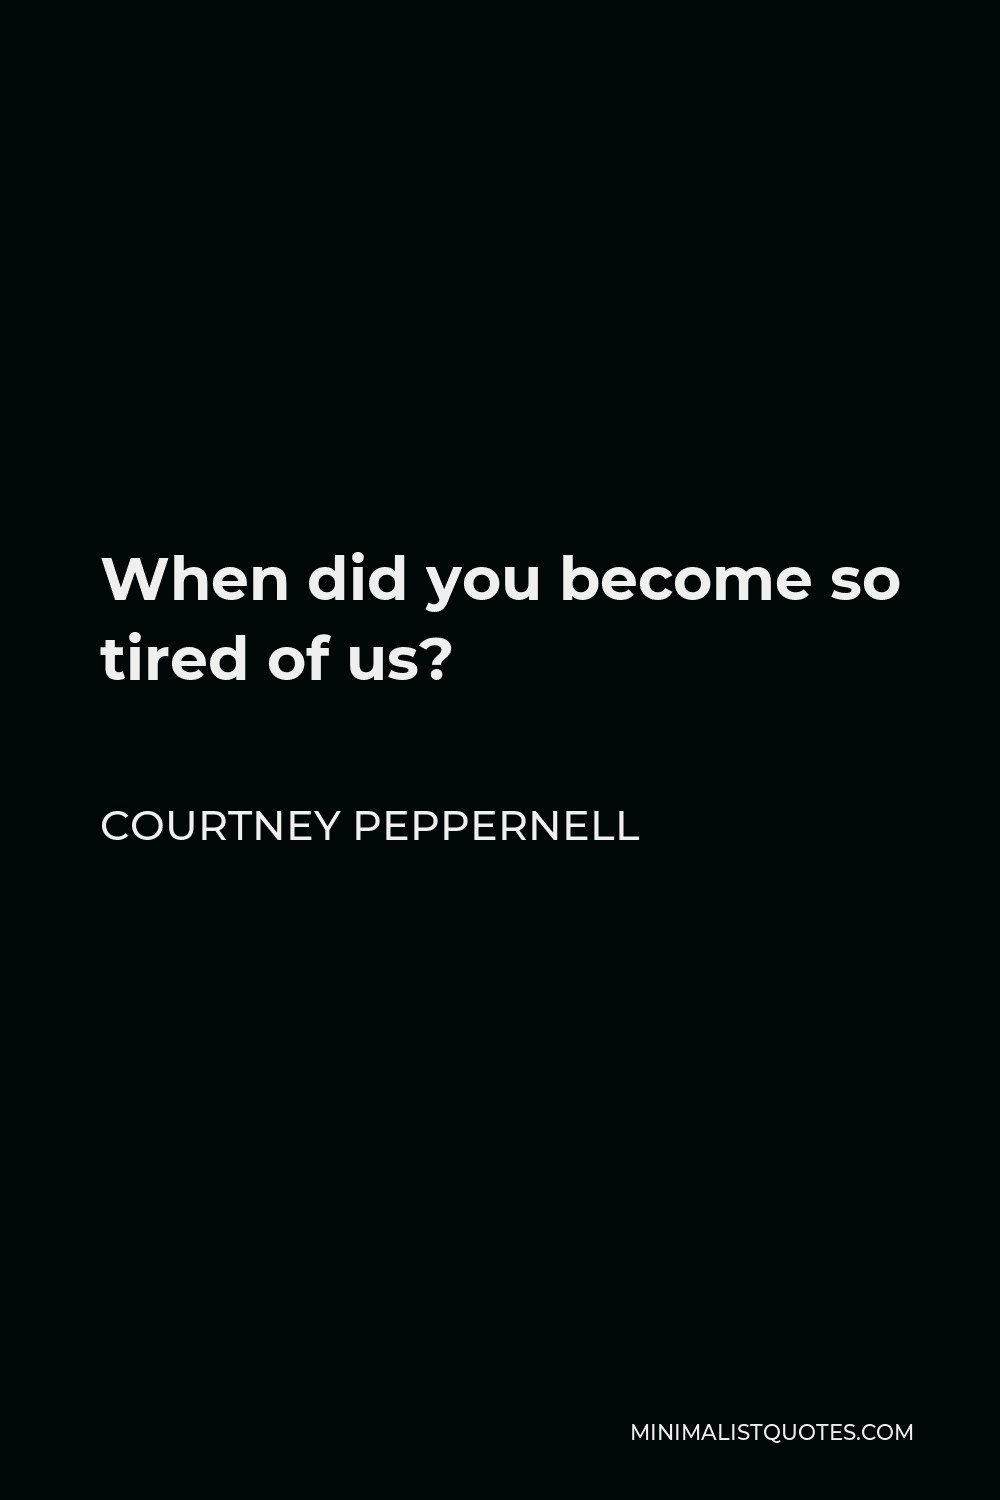 Courtney Peppernell Quote - When did you become so tired of us?